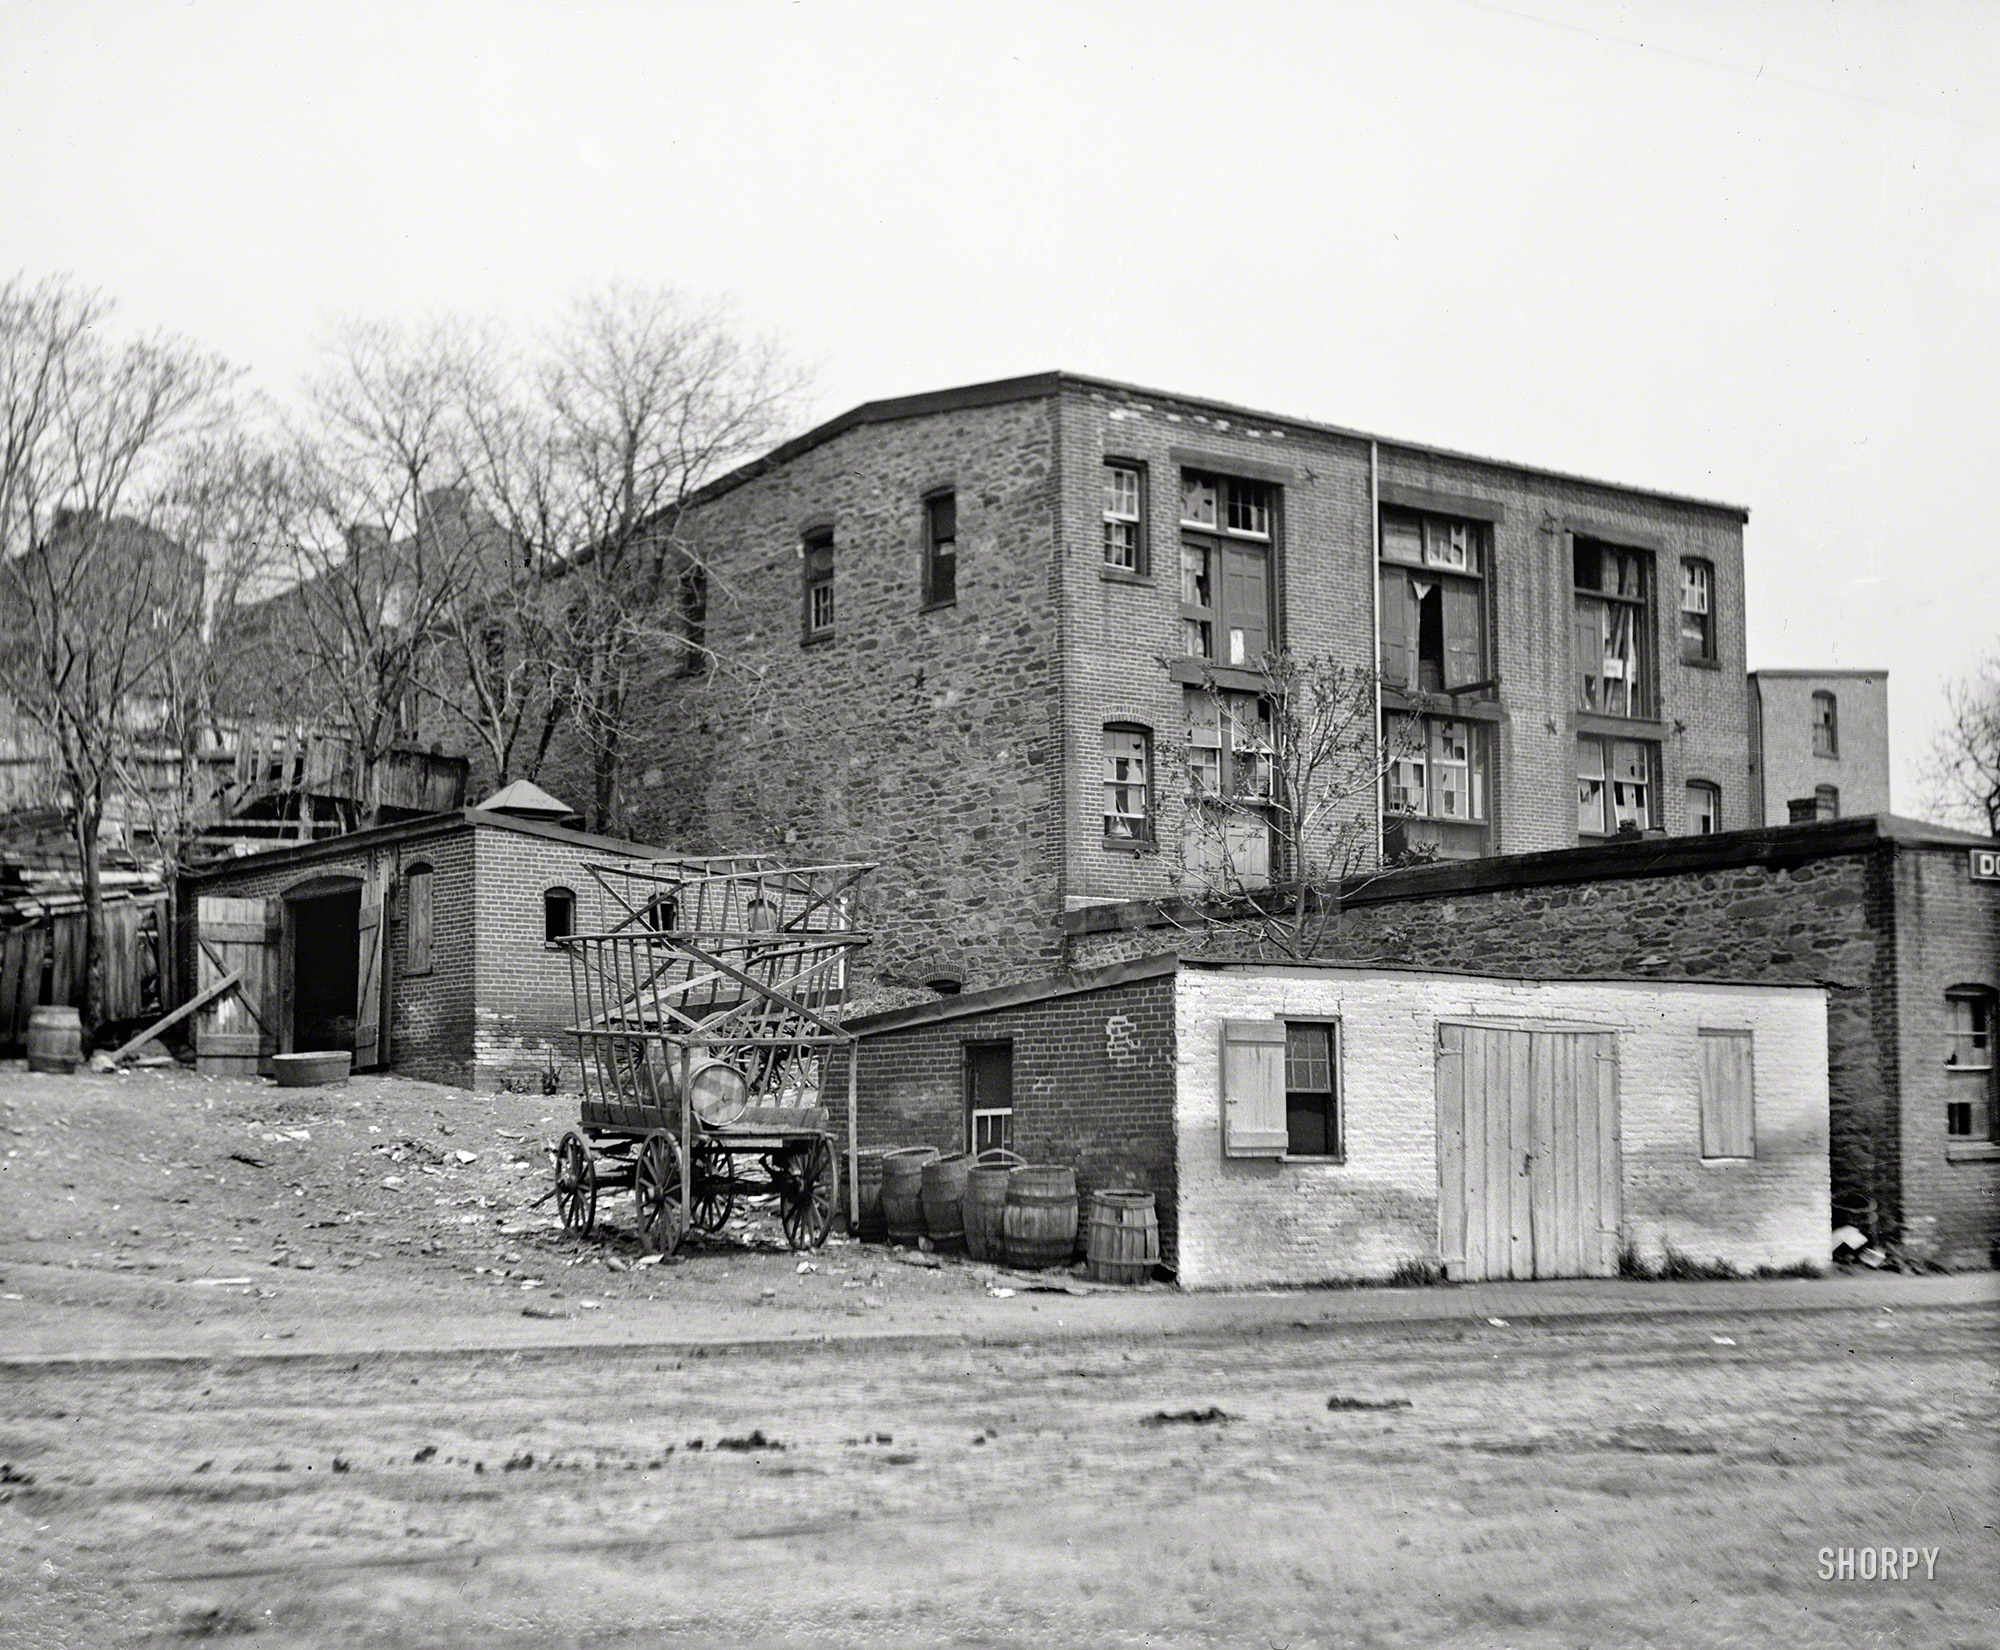 Washington, D.C., circa 1900. "Old warehouse, Water Street S.W." National Photo Company Collection glass negative. View full size.